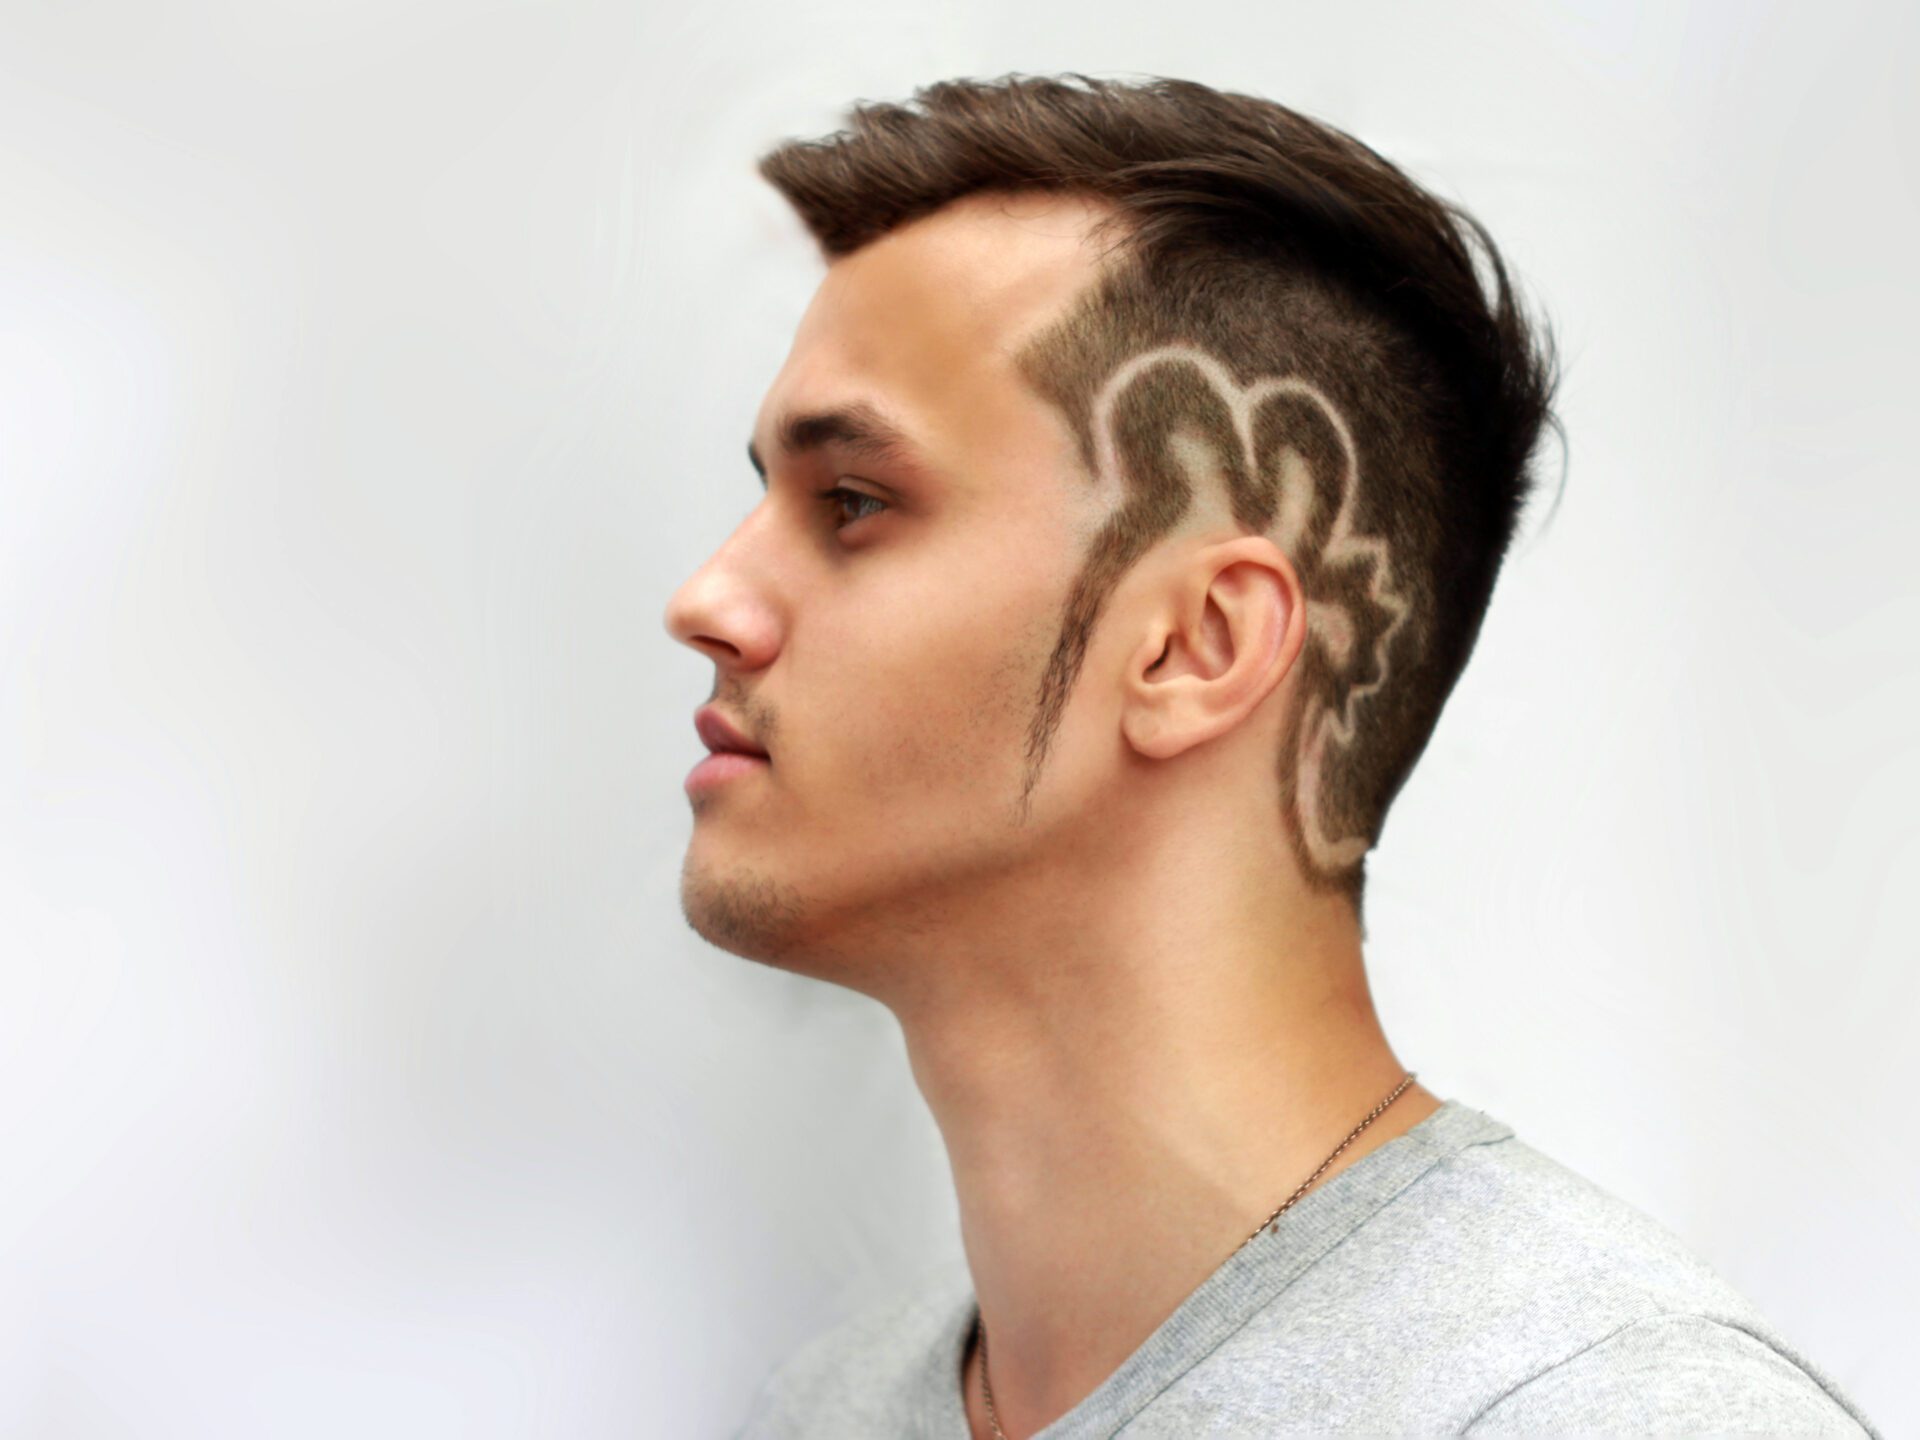 Haircut Designs For Men The Gallery Of Unique Ideas To Try